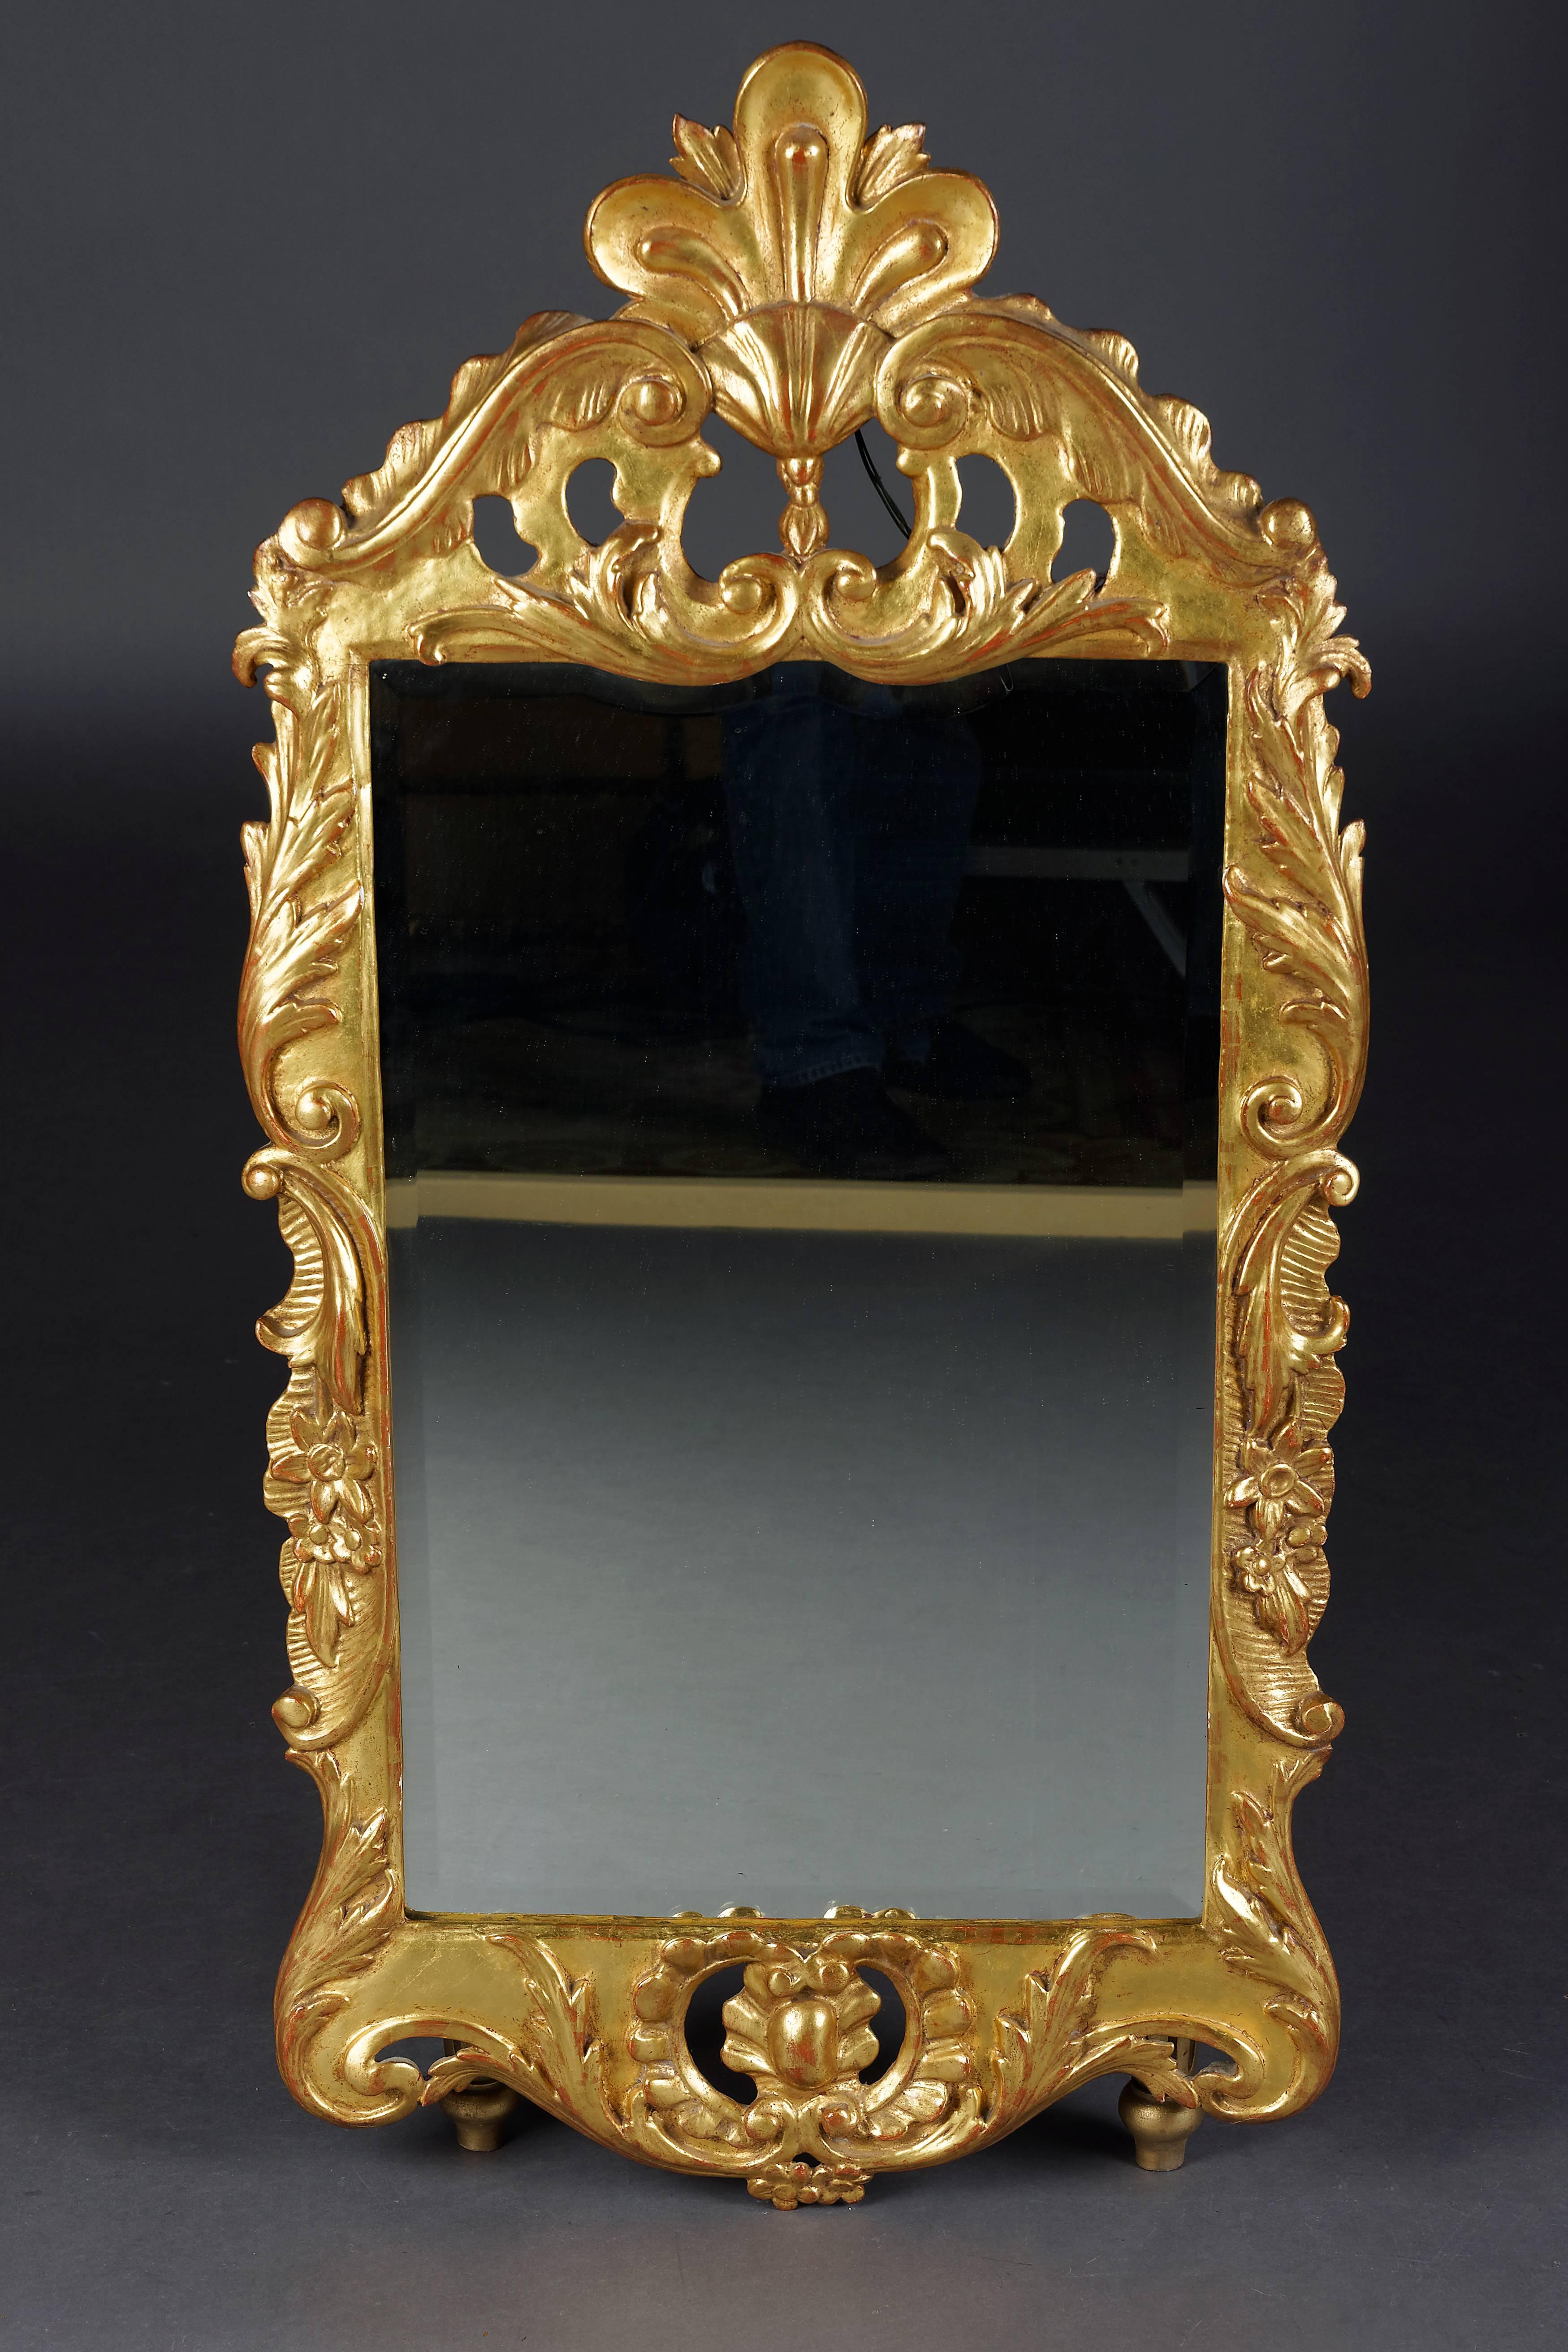 Solid wood carved and leaf gilded. Shaped carved frame. The Giebelfeld is decorated with sculptured carved Baroque elements. Such models can only be found in castles.

(M-14).